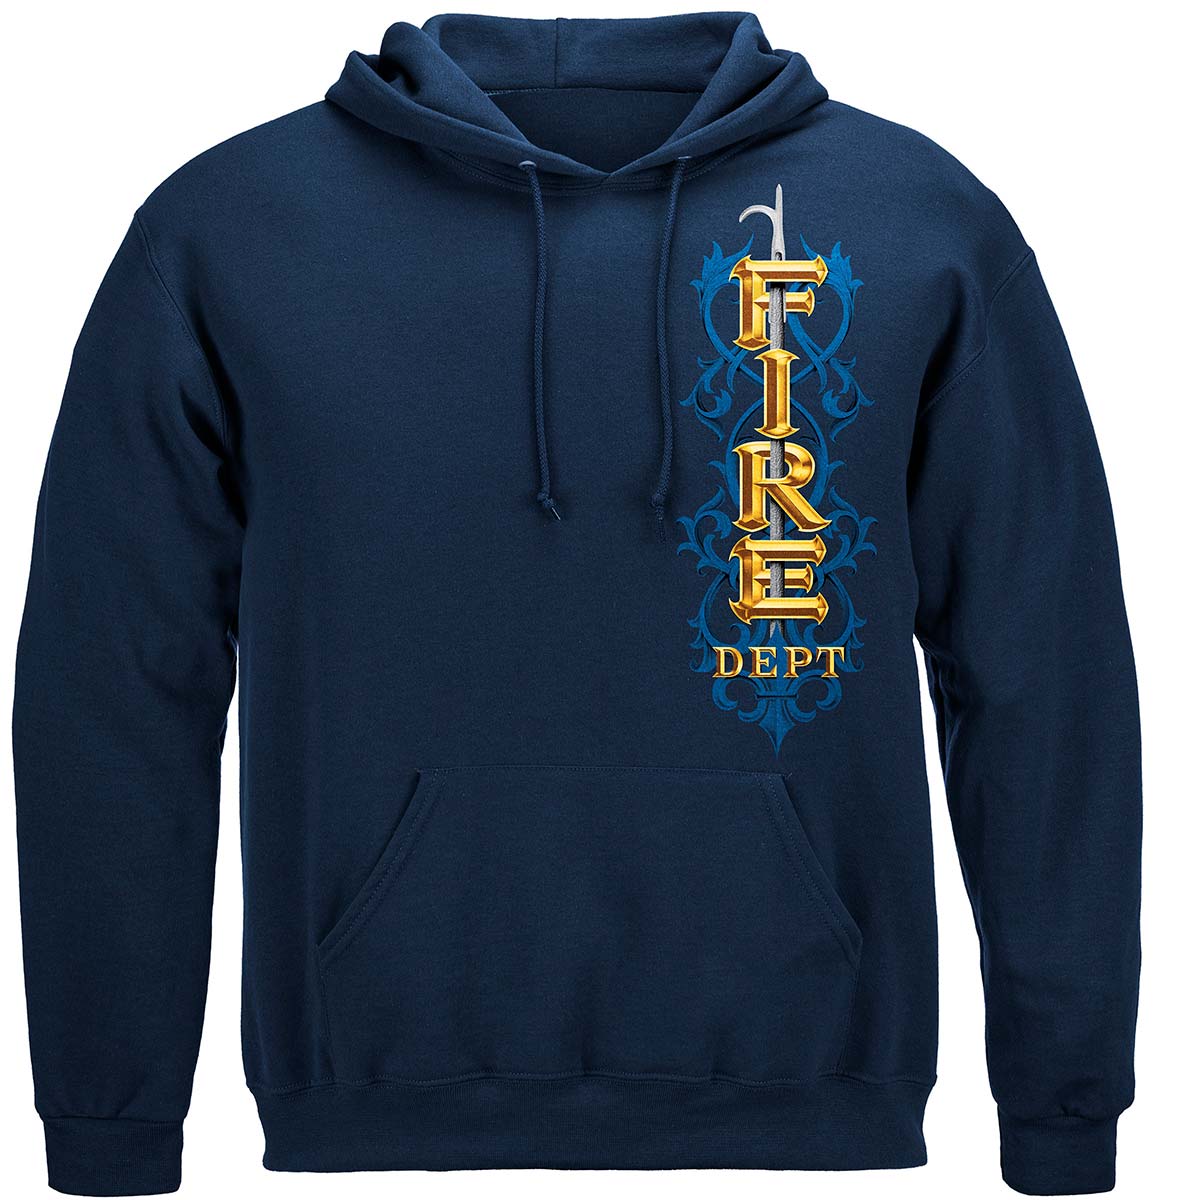 Firefighter Pikes Premium Long Sleeves